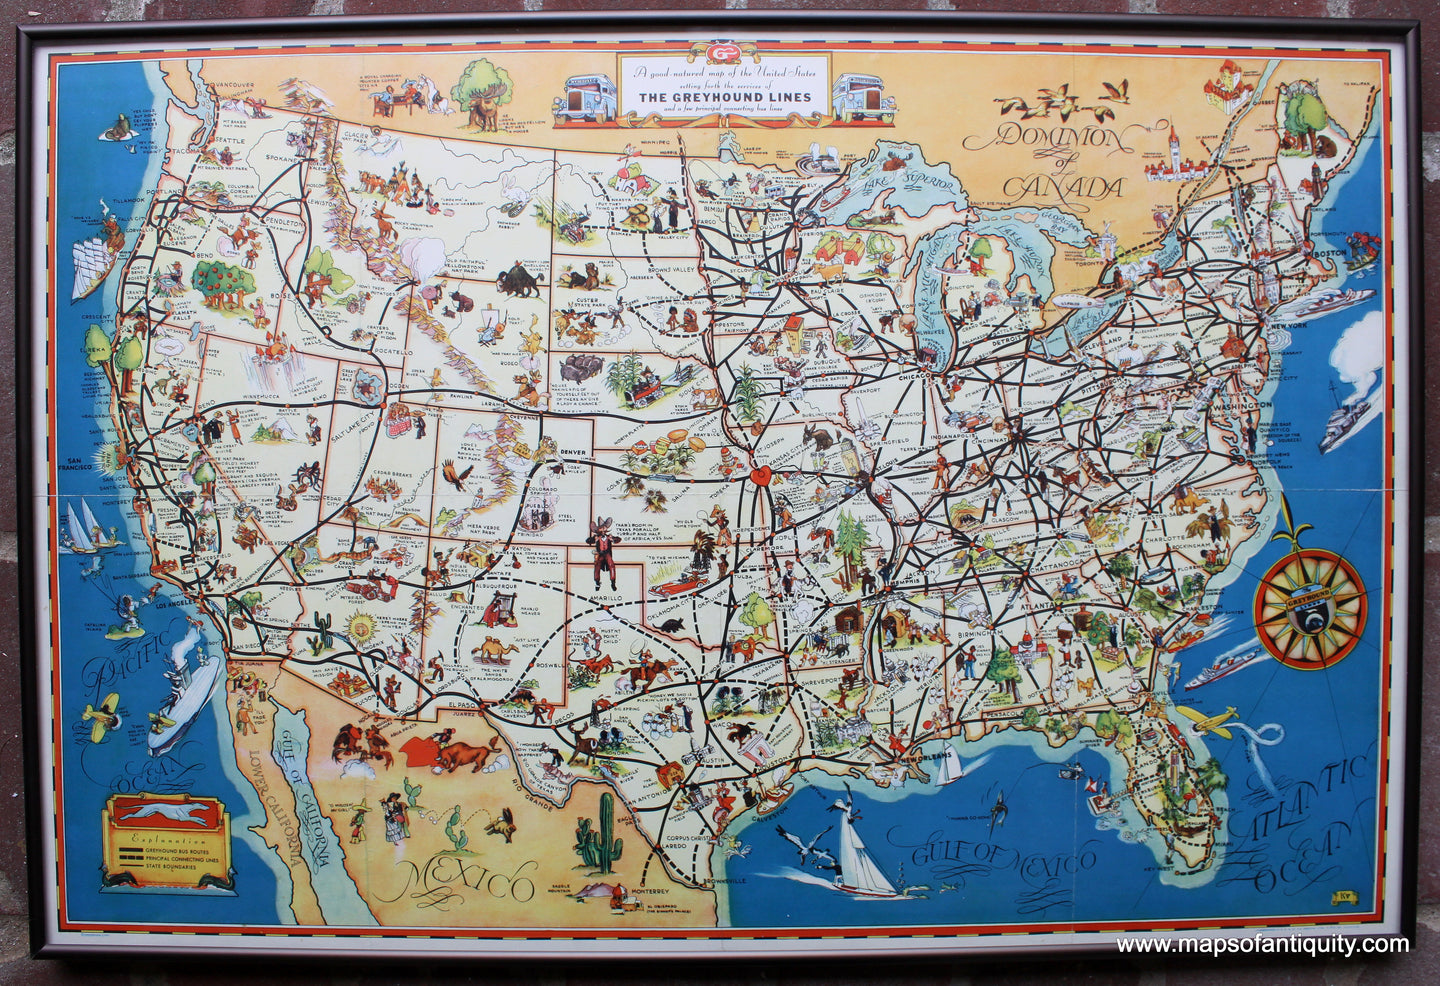 Antique-Map-Pictorial-A-good-natured-map-of-the-United-States-setting-forth-the-services-of-the-Greyhound-Lines-and-a-few-principal-connecting-bus-lines-1935-Pacific-Greyhound-LinesMaps-of-Antiquity